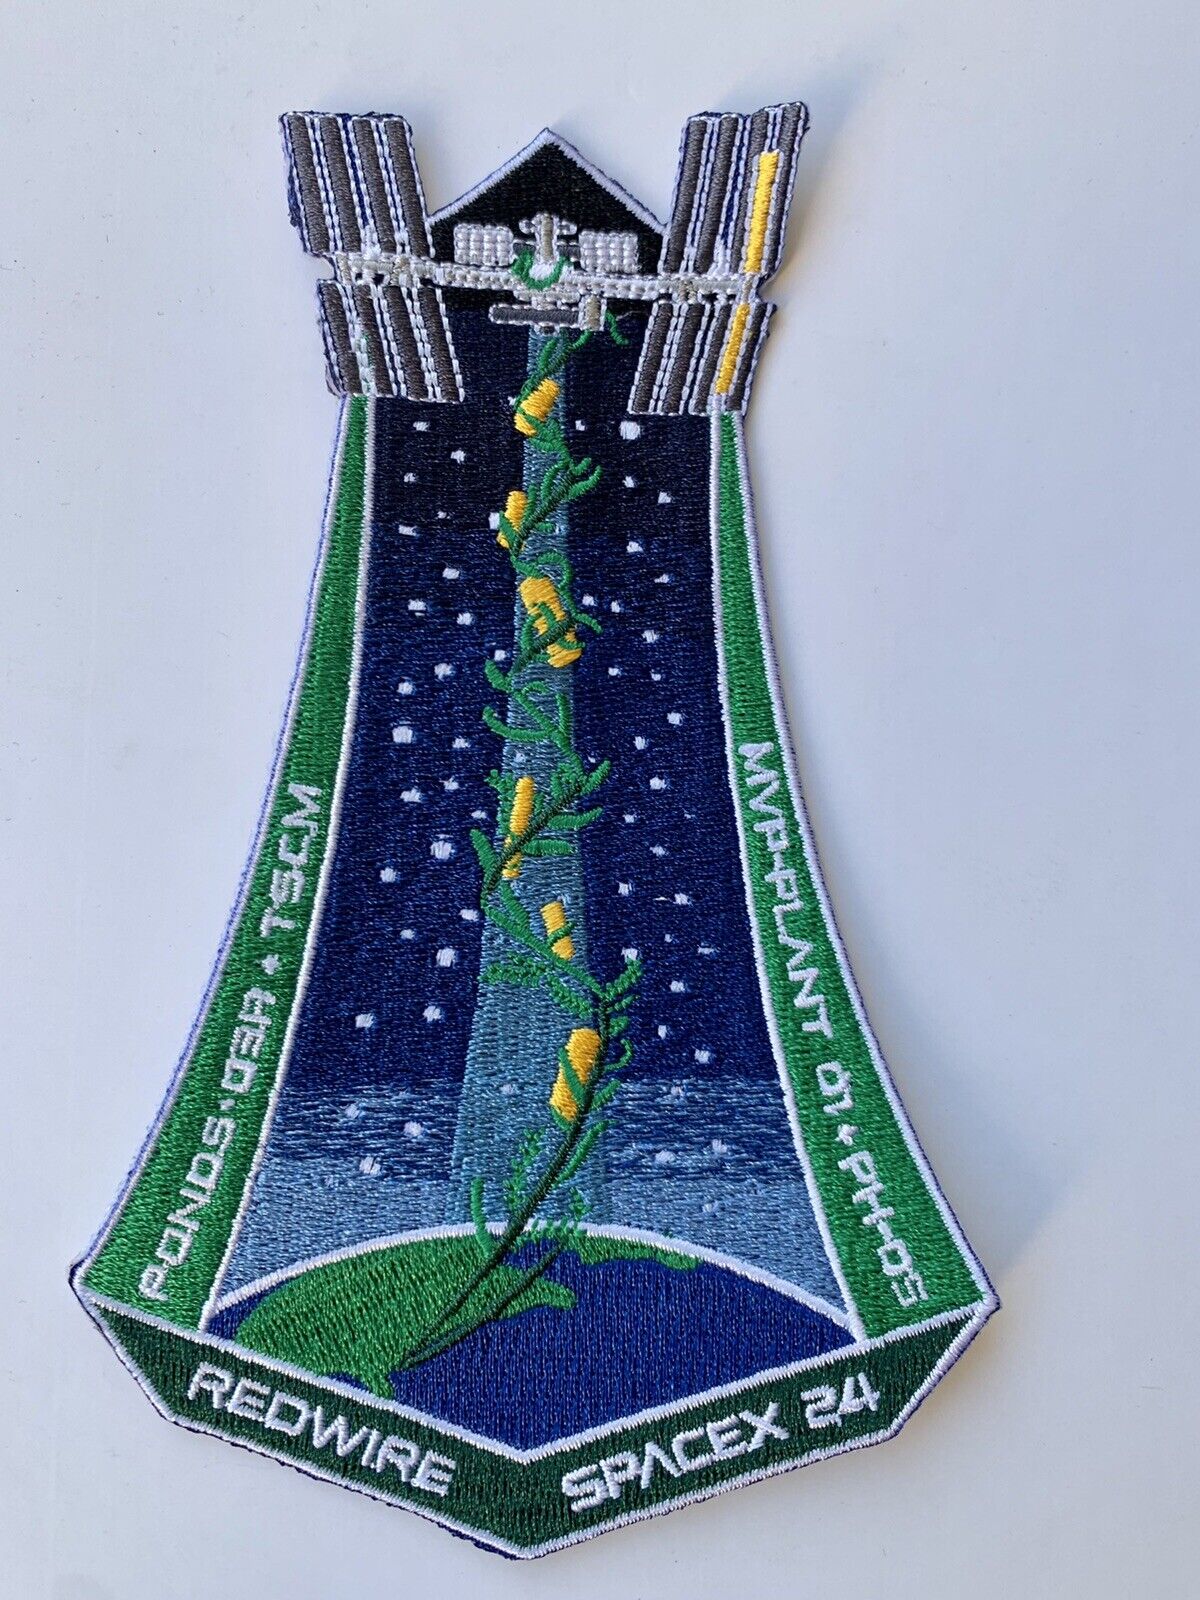 Original SPACEX CRS-24 NASA COMMERCIAL ISS RESUPPLY MISSION PATCH SOLAR PANELS